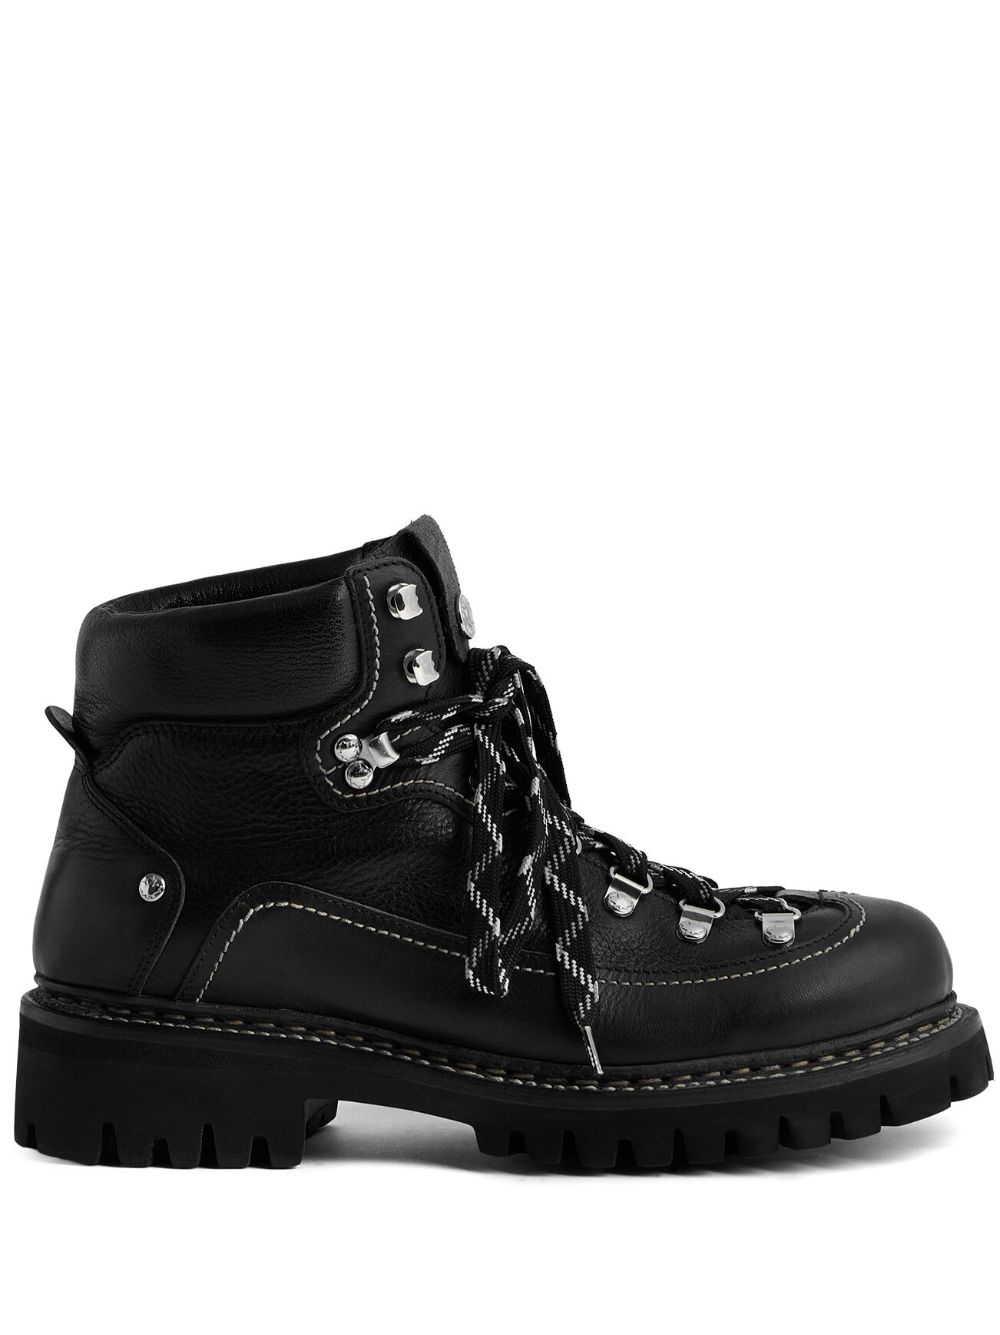 DSQUARED2 leather hiking boots - Black von DSQUARED2